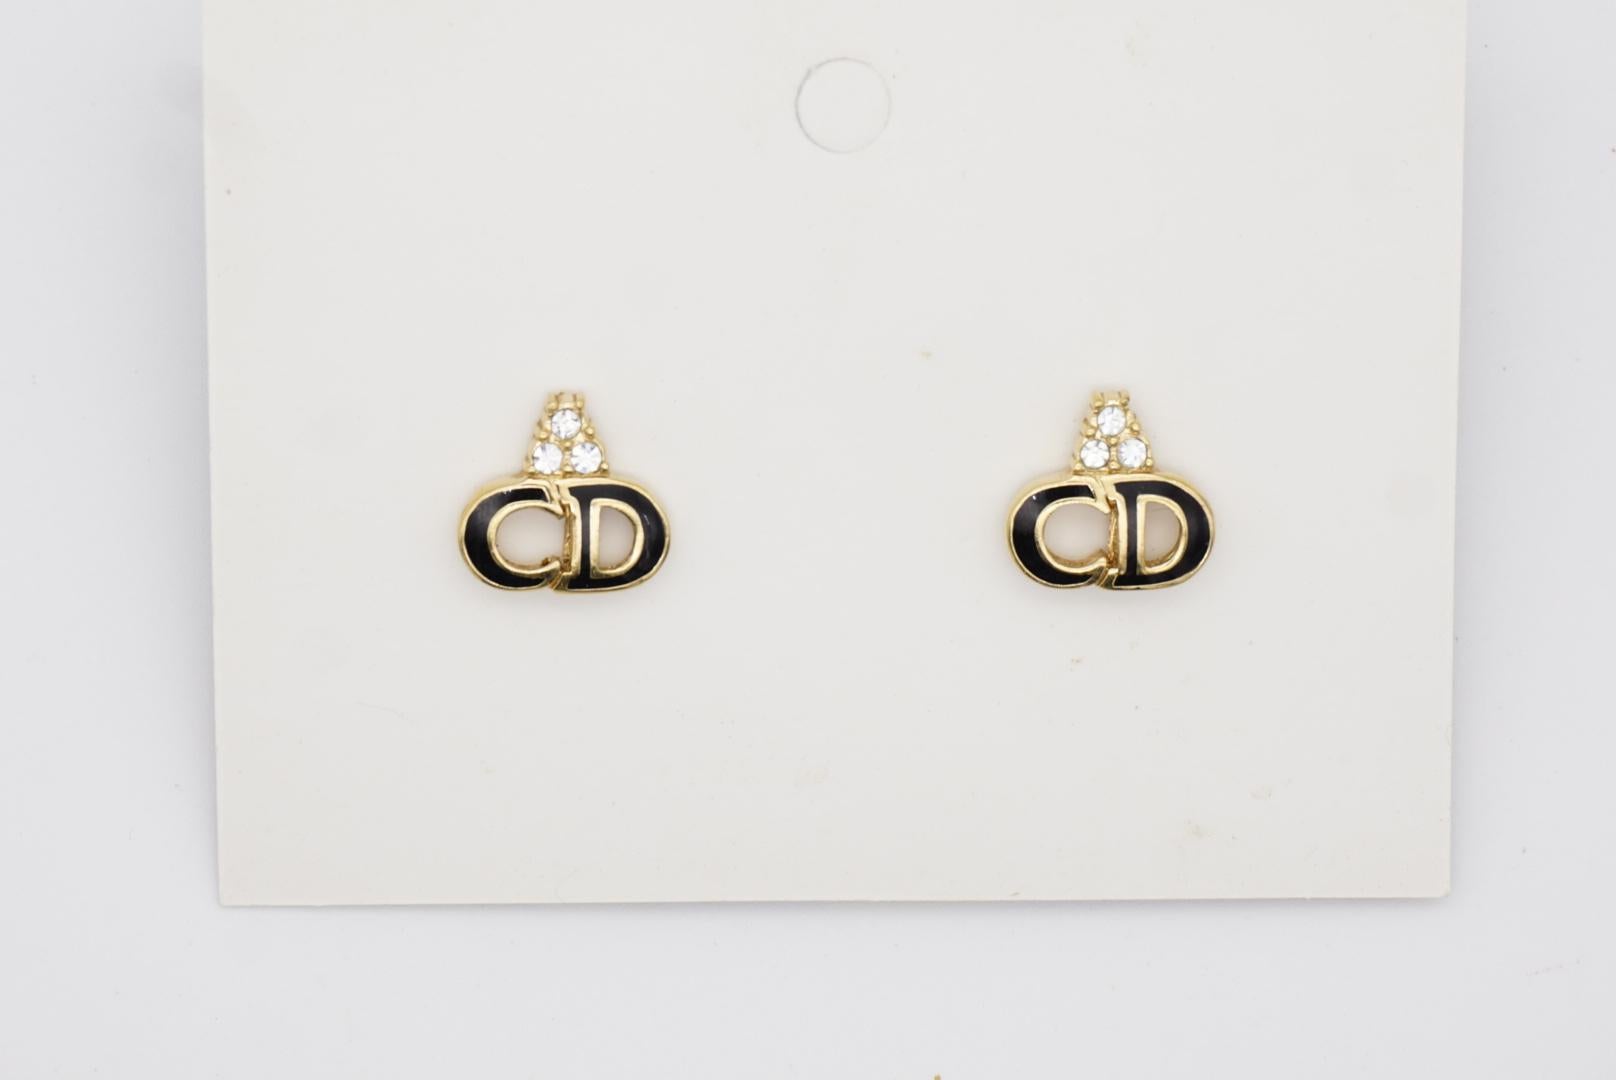 Christian Dior Vintage 1990s Monogram Logo Black CD Crystals Pierced Earrings In Good Condition For Sale In Wokingham, England